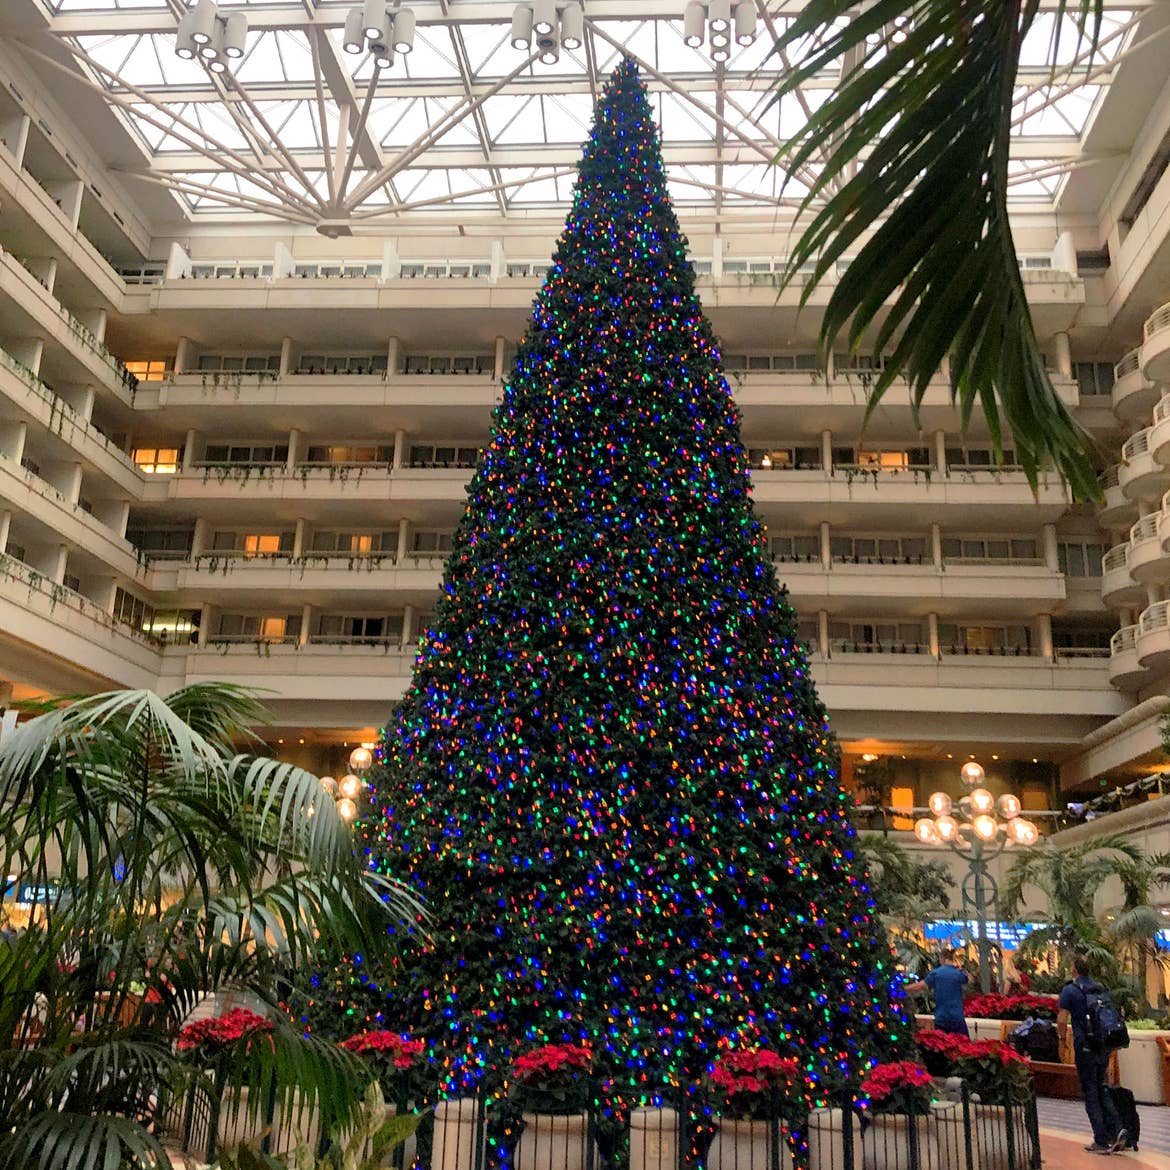 The terminal at MCO airport is decked out for the holiday season with a giant Christmas tree.